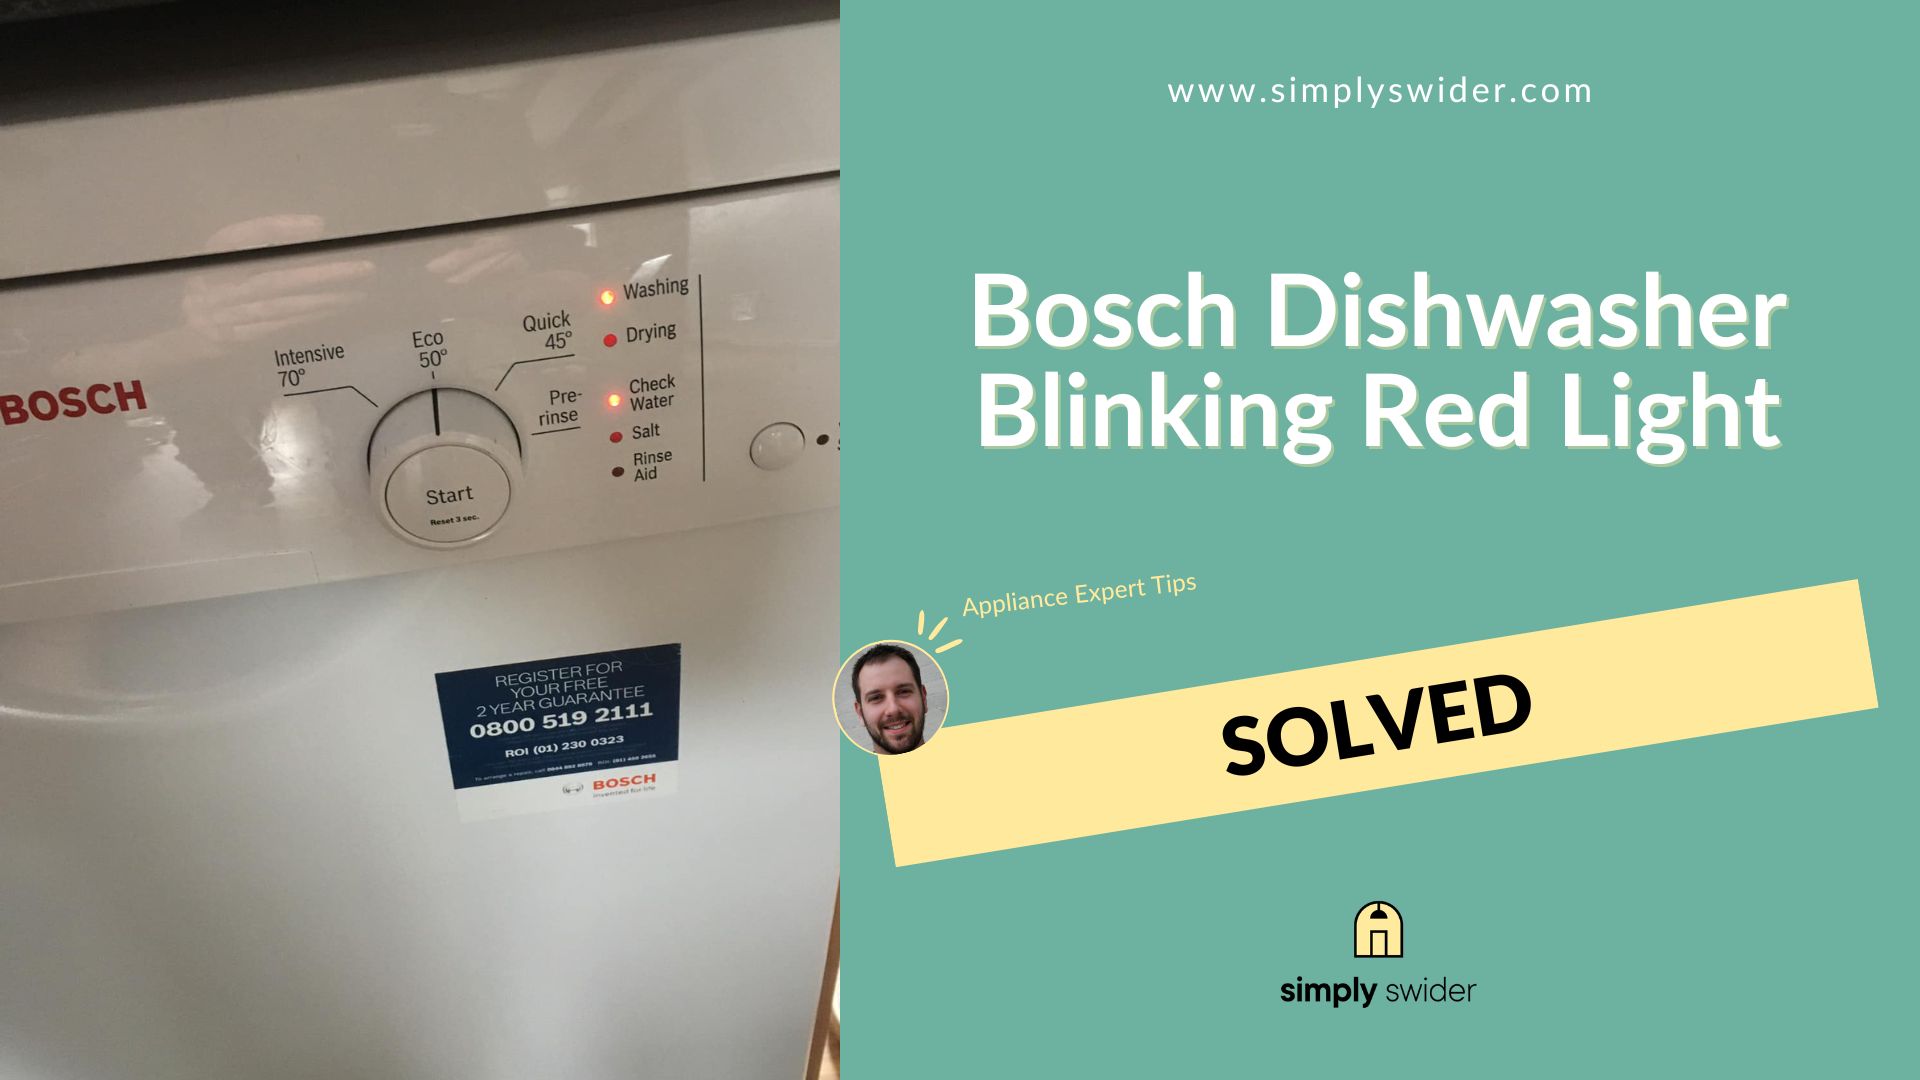 Bosch Dishwasher Not Starting? Red Light Flashing? Here's what to do!